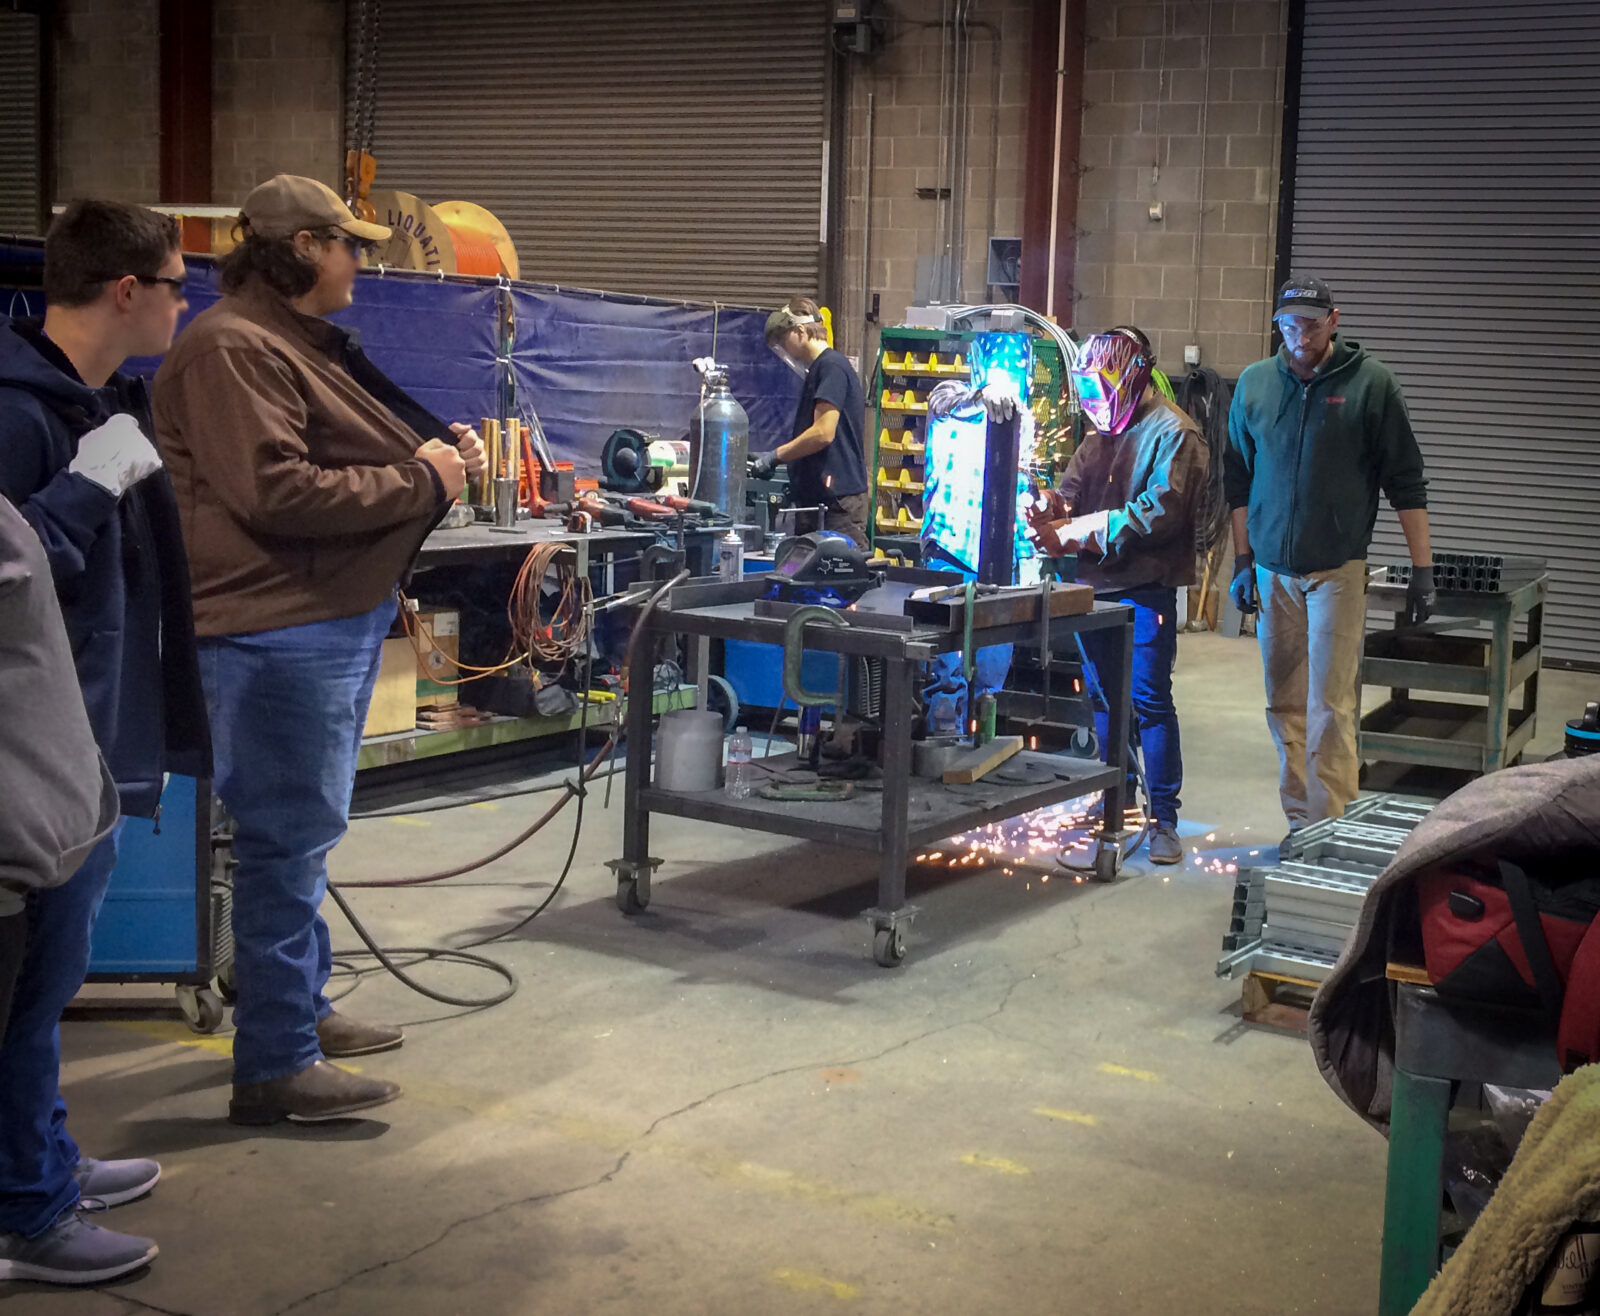 High school students at an electrical trade event. One is welding while others look on.